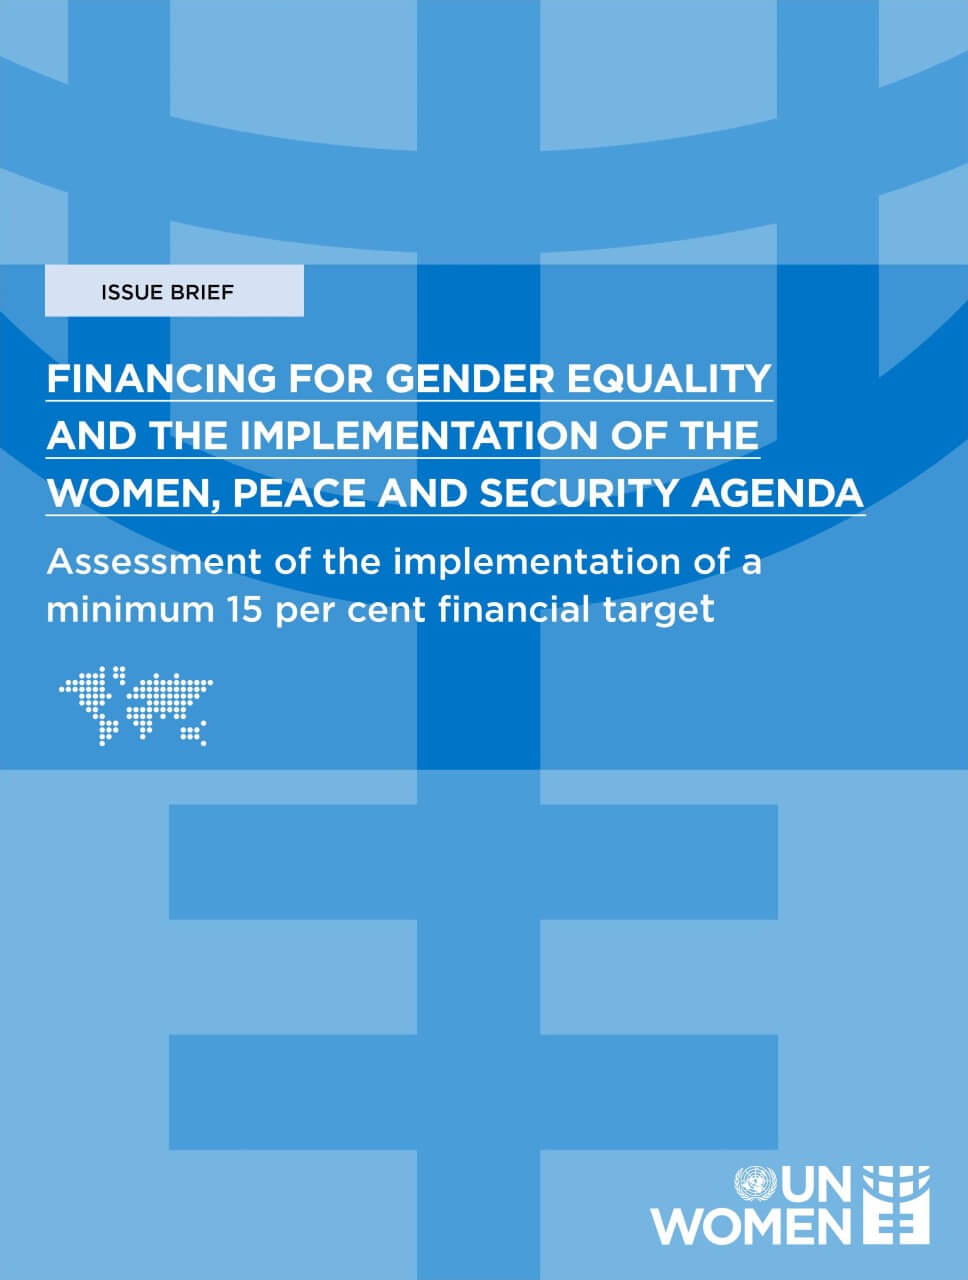 Financing for gender equality and the implementation of the women, peace and security agenda